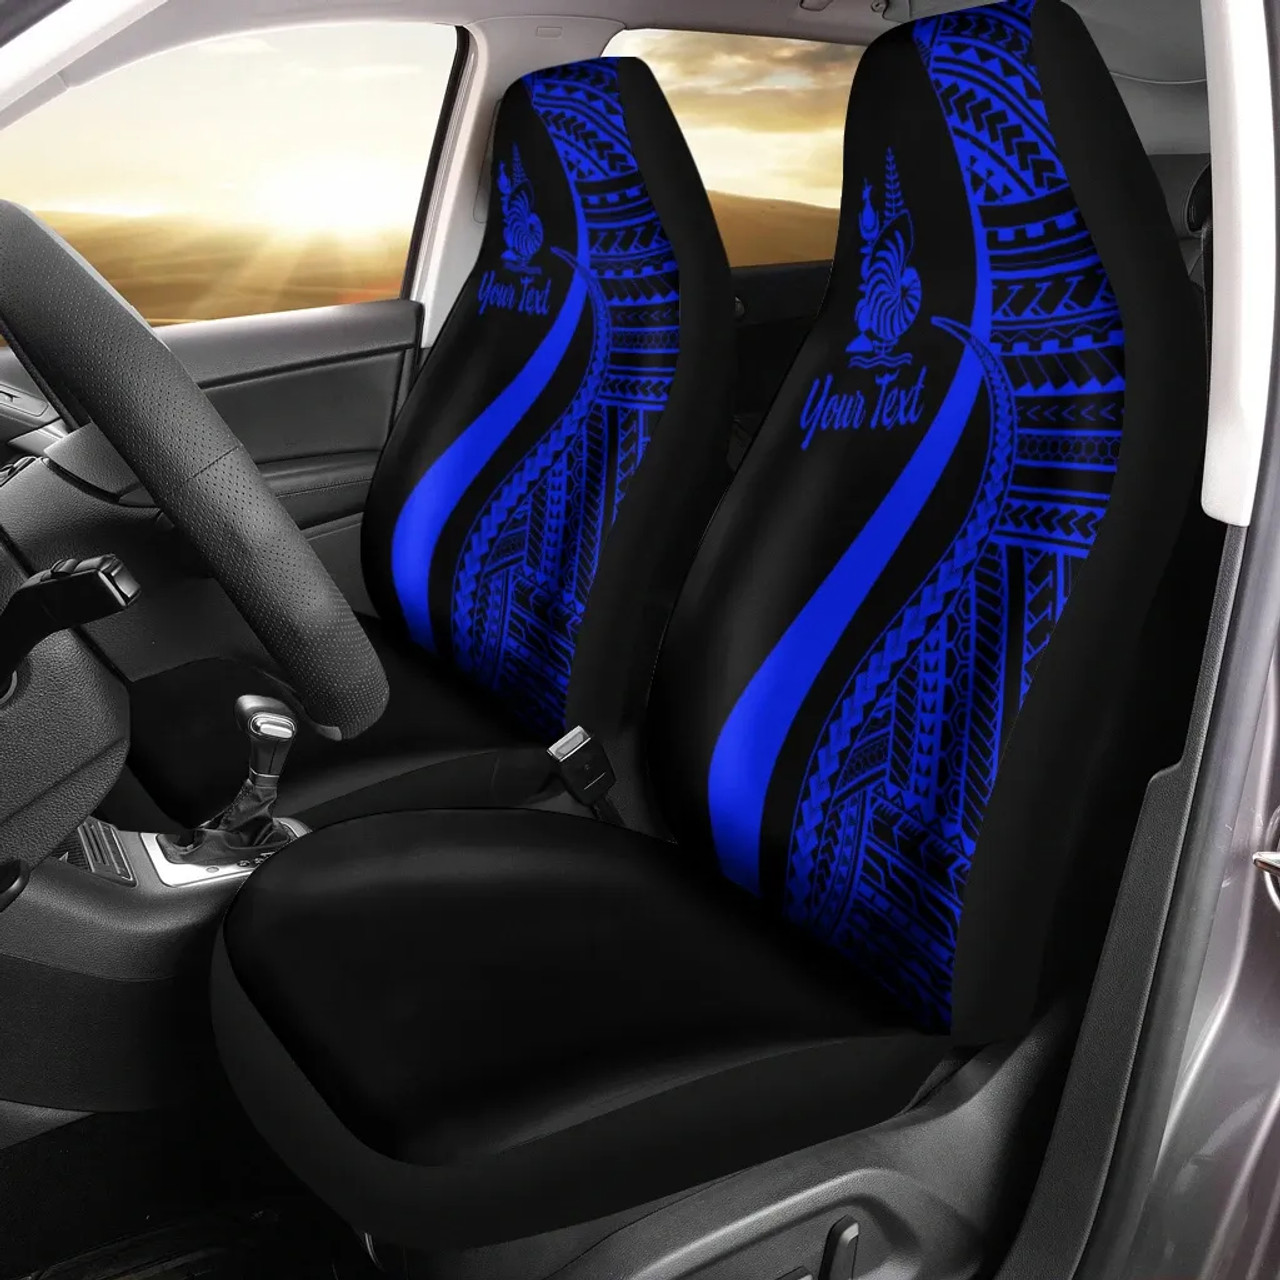 New Caledonia Custom Personalised Car Seat Covers - Blue Polynesian Tentacle Tribal Pattern Crest